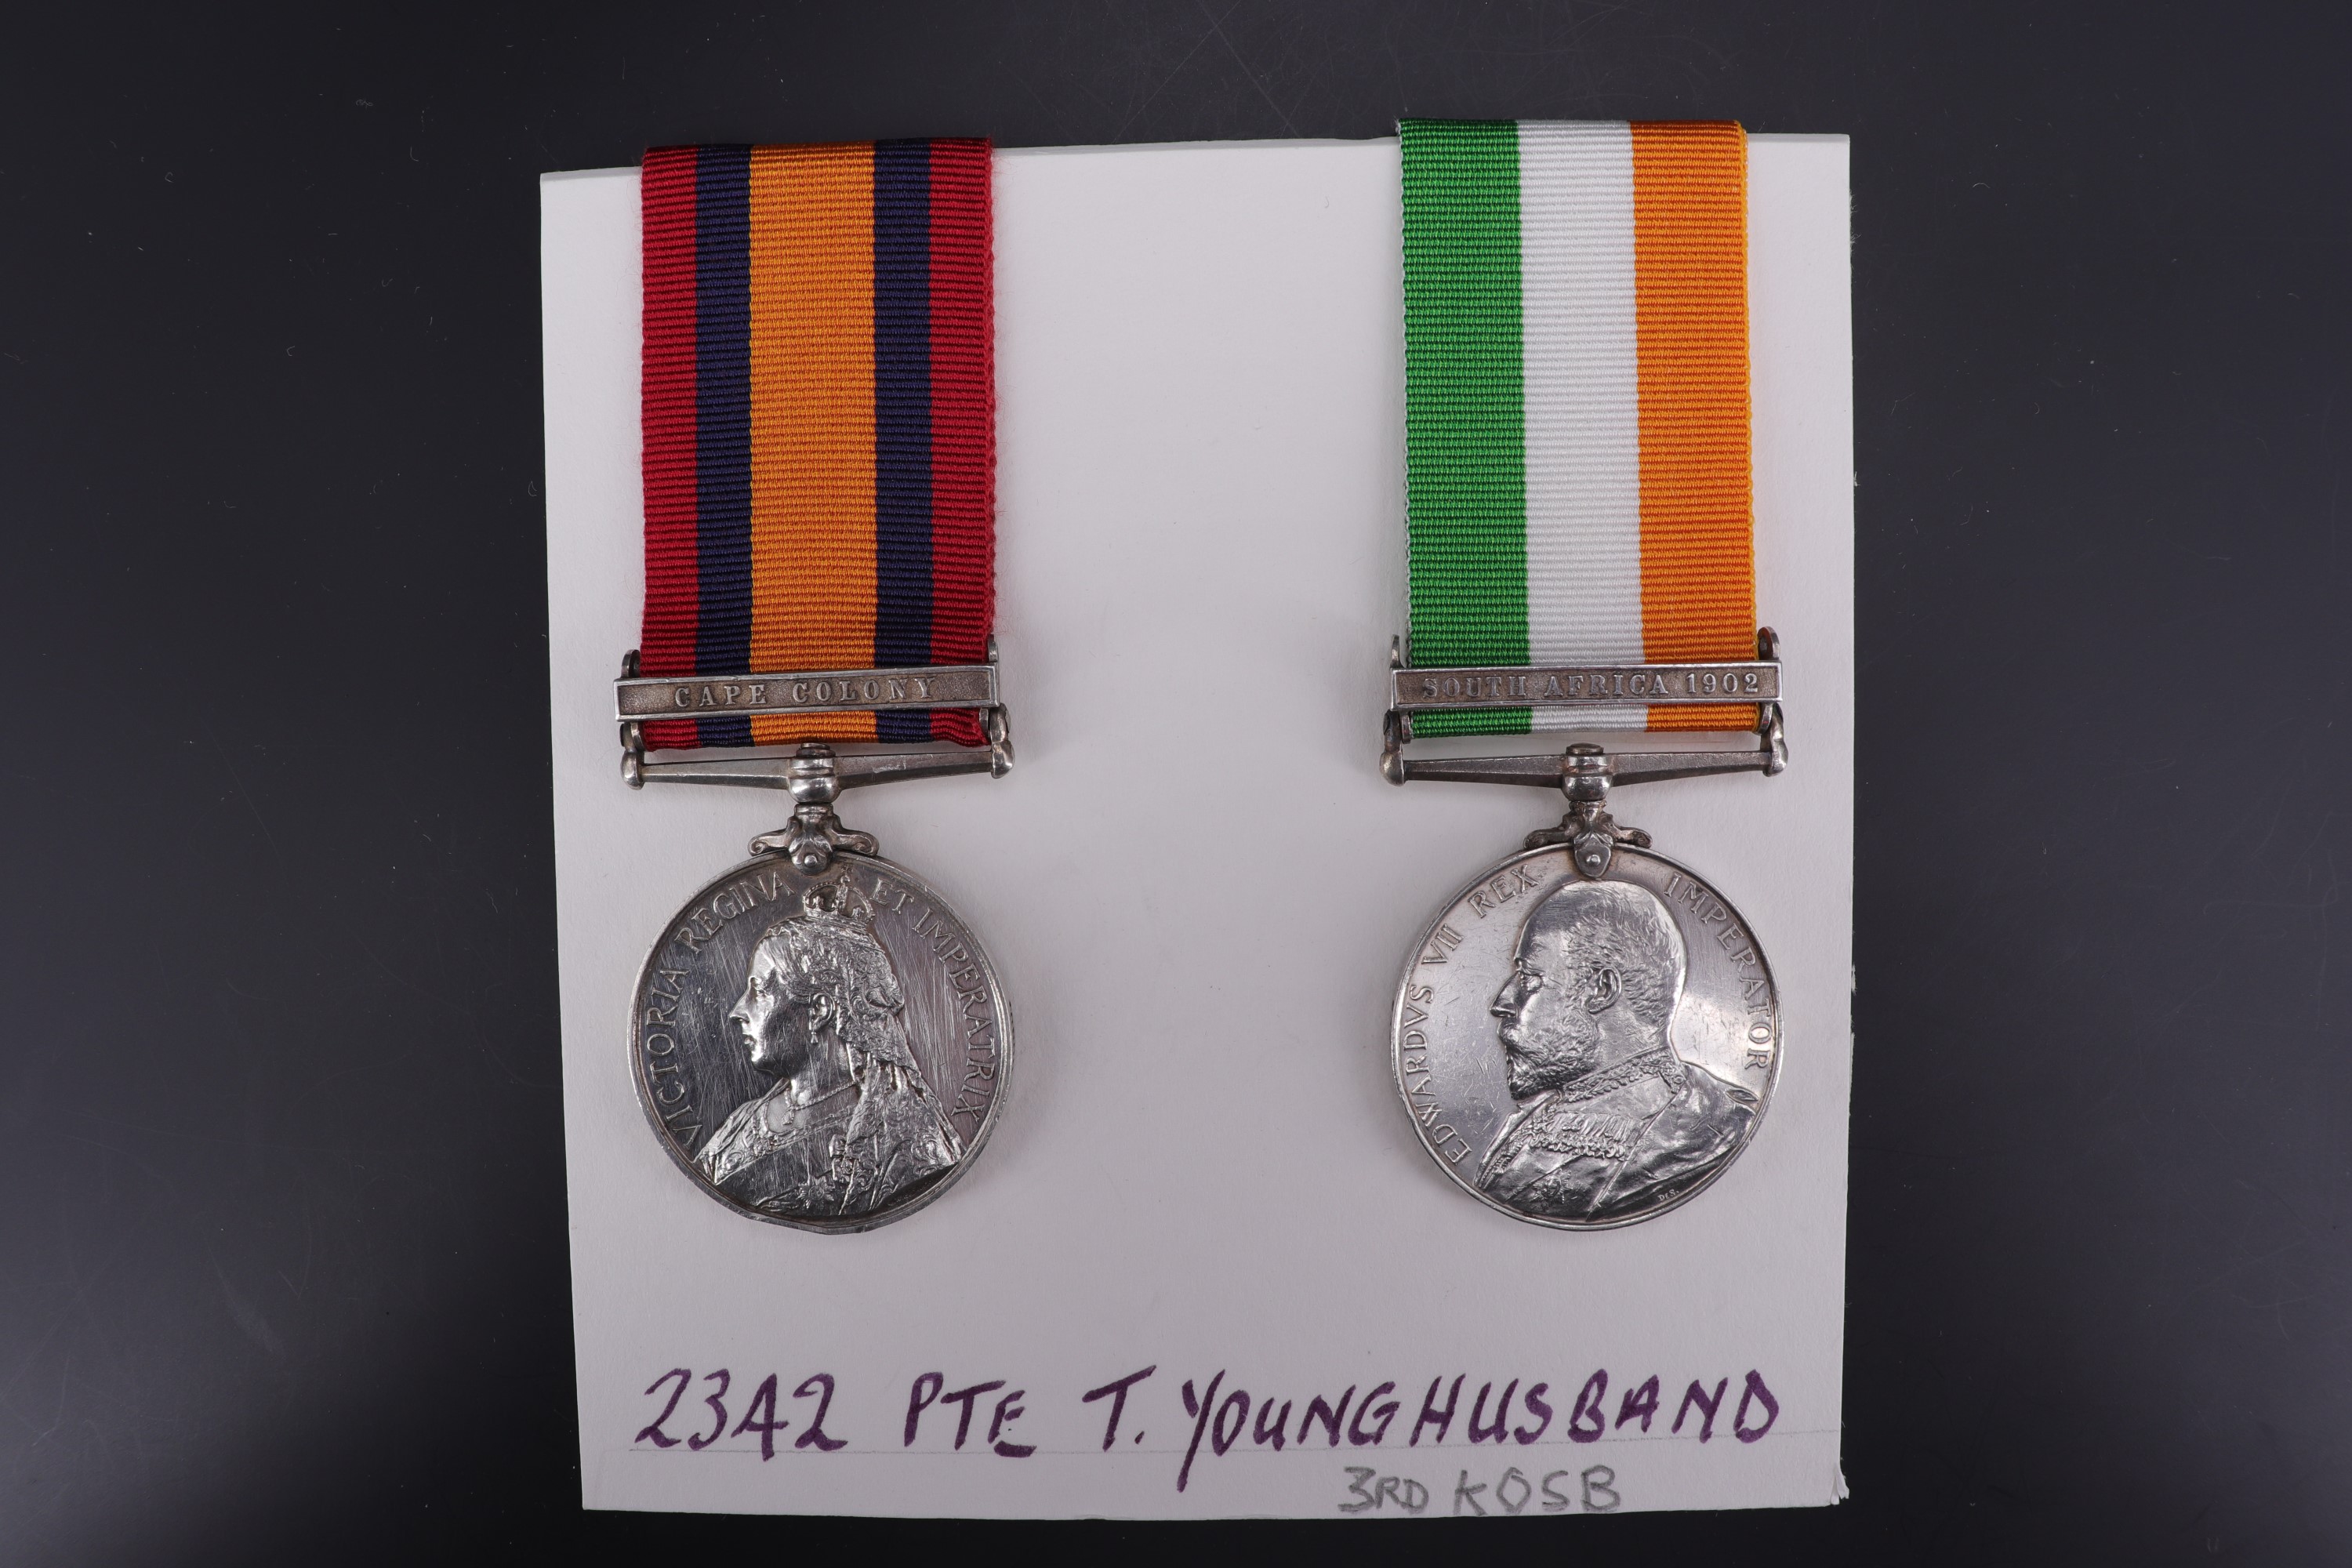 Queen's and King's South Africa medals to 2342 Pte T Younghusband, 3rd KOSB